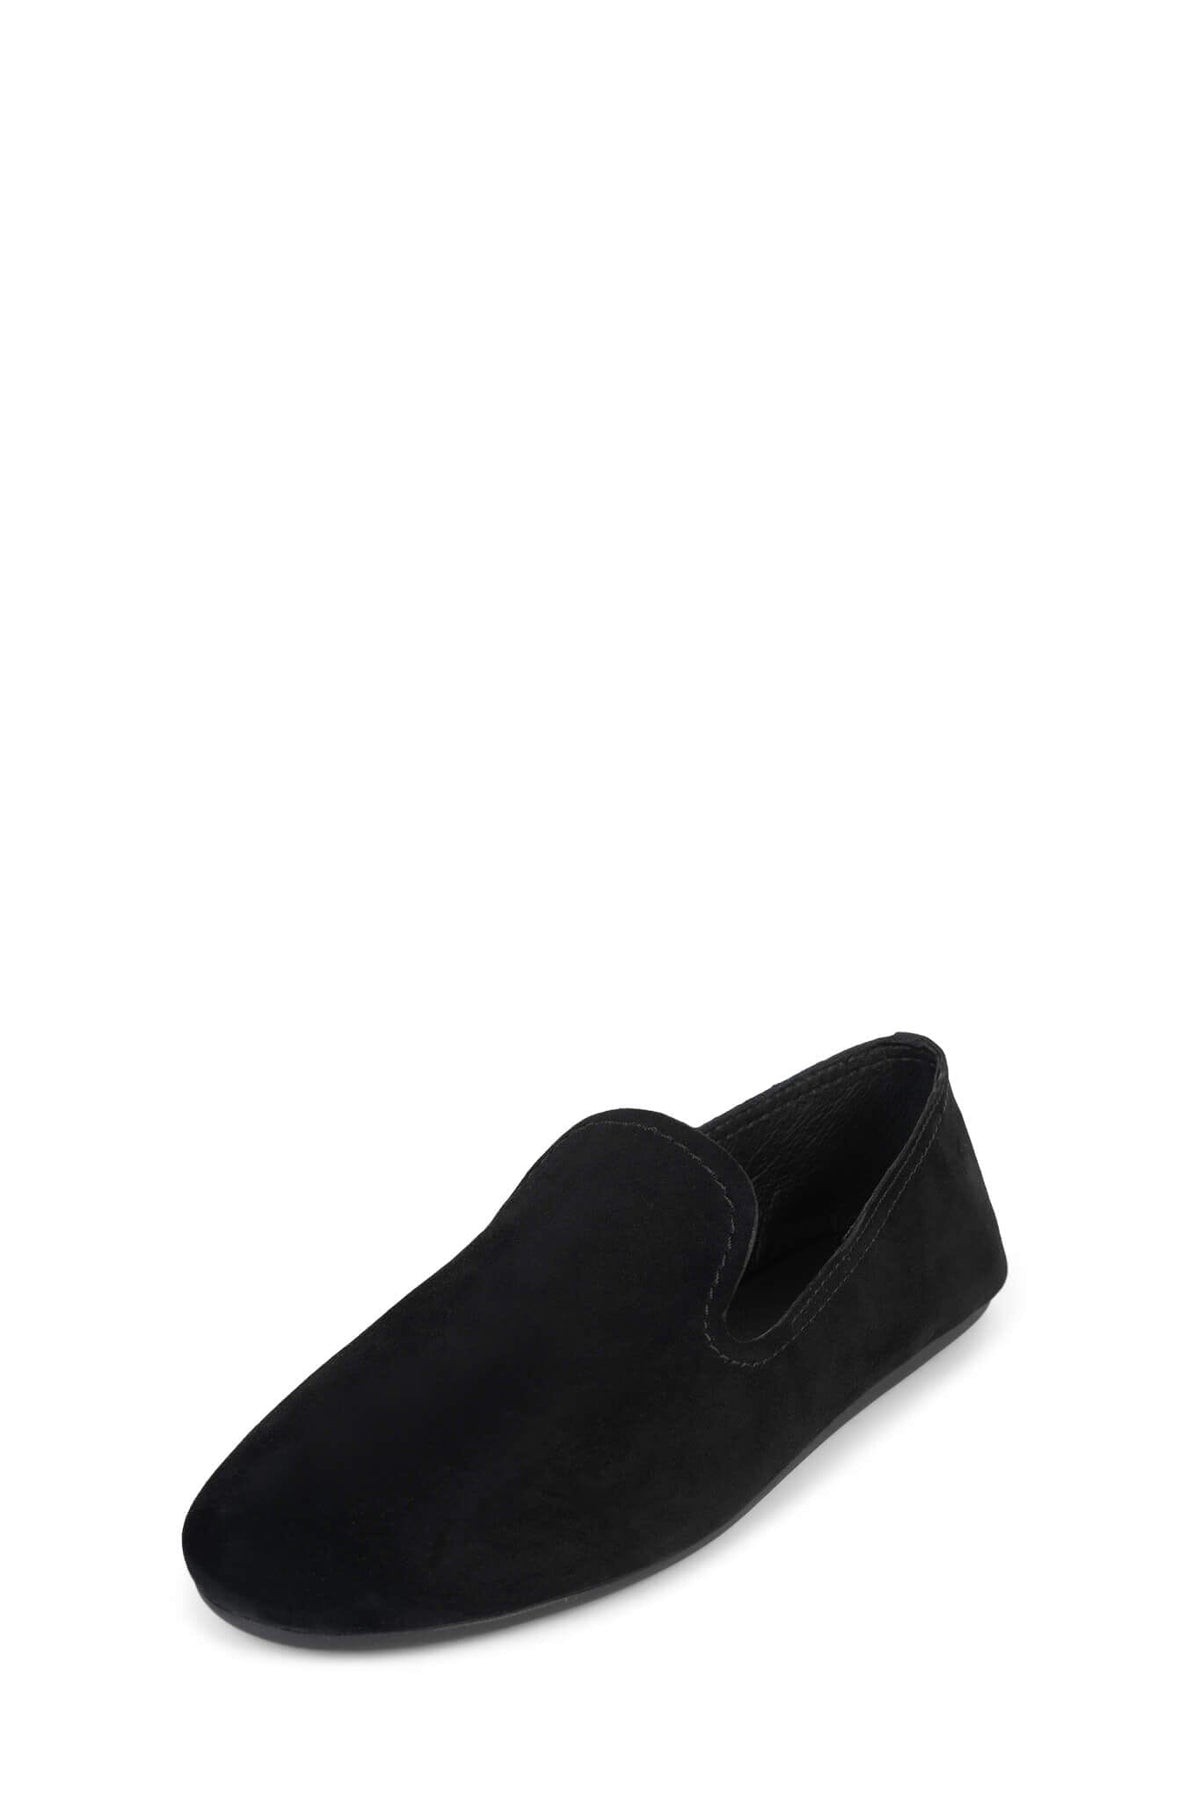 SPIN Jeffrey Campbell Flat Loafers Black Suede